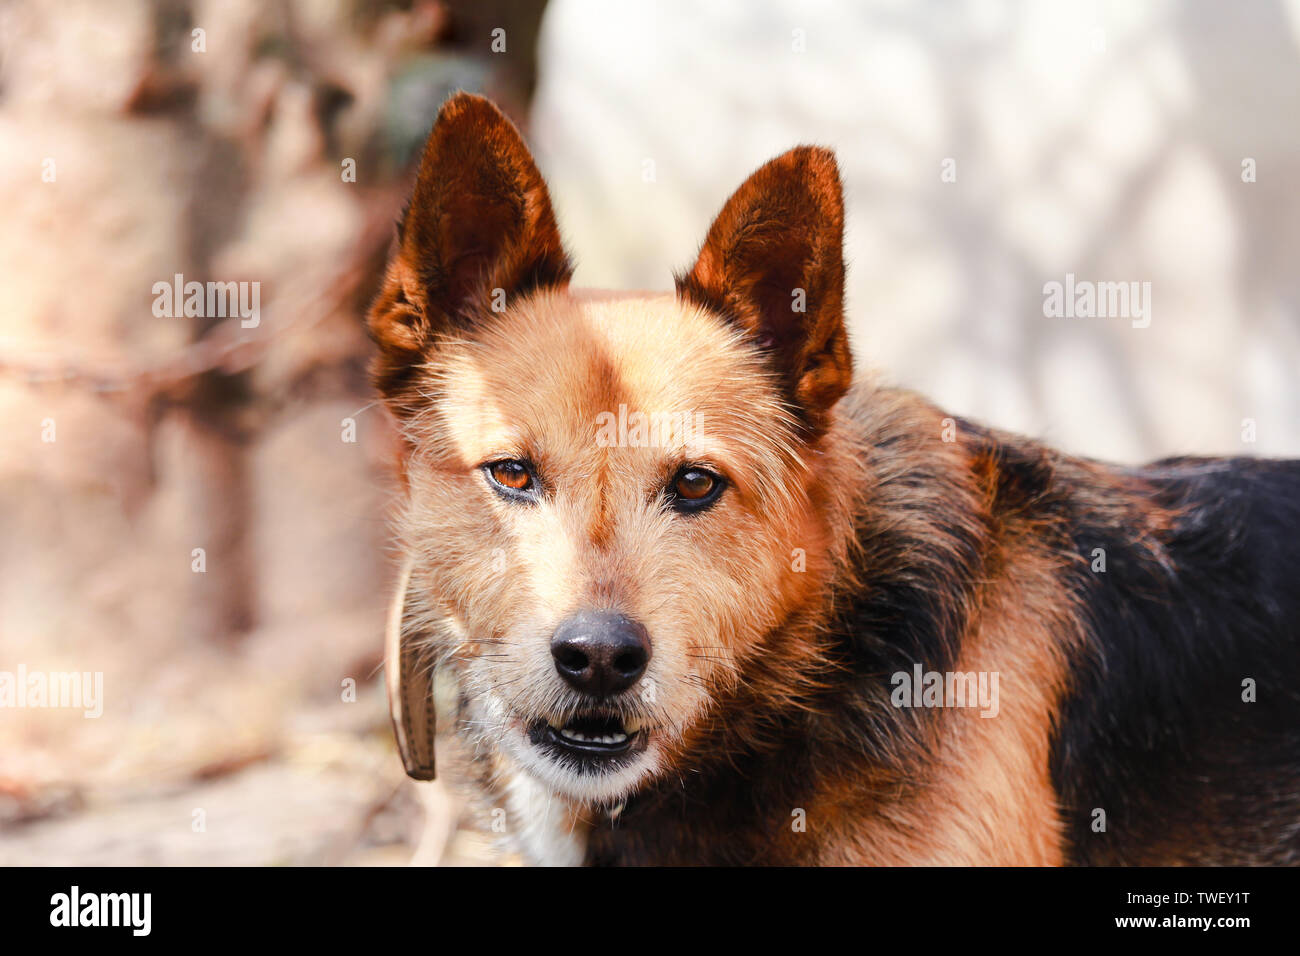 Beautiful mutt with gentle brown eyes looking directly at camera. Blurred background with copy space. Stock Photo